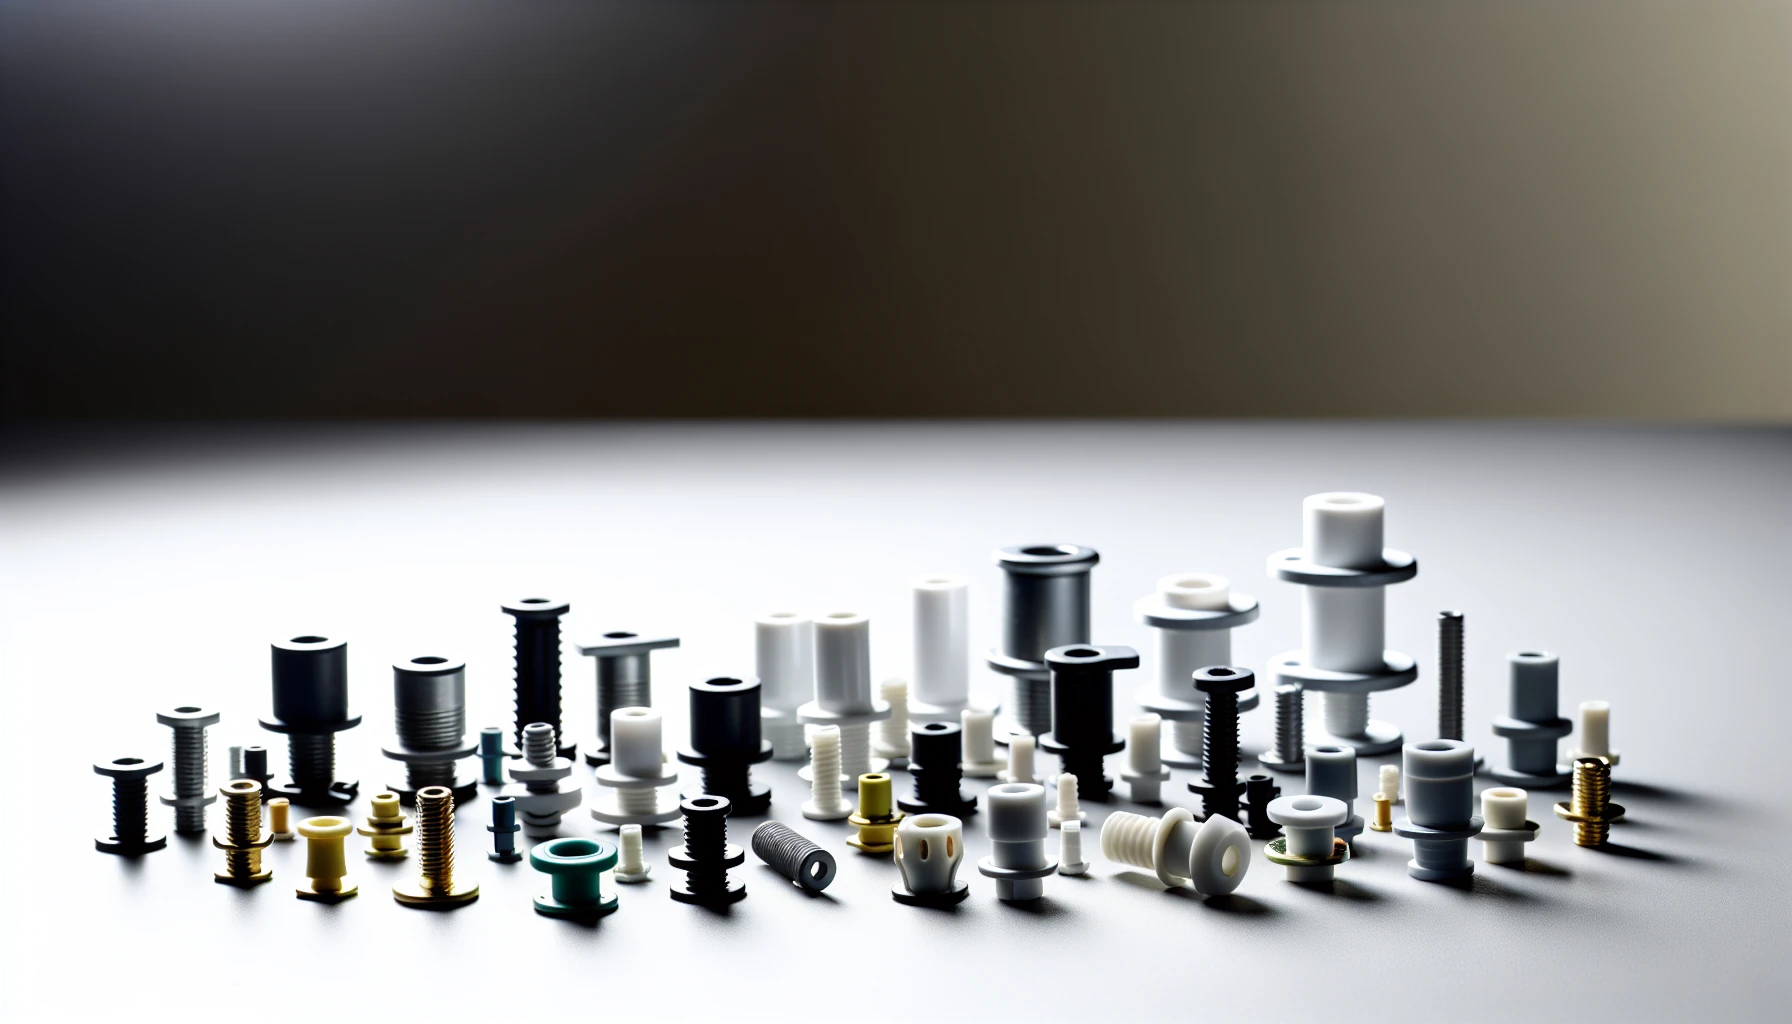 Selection of electrical standoffs for different applications